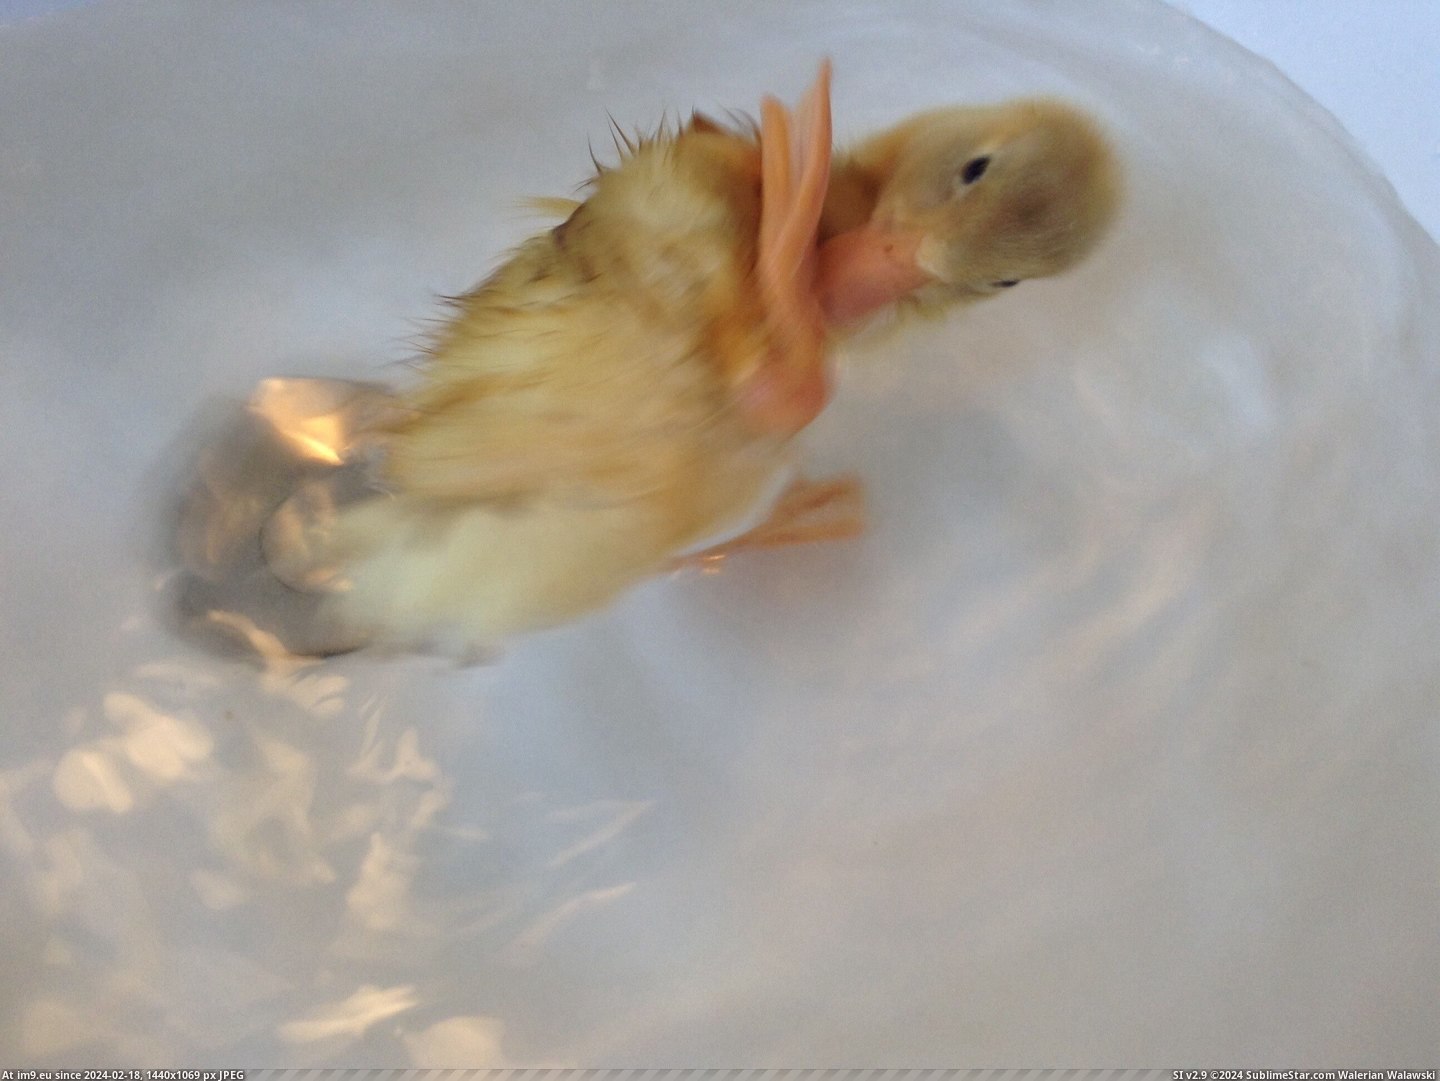 #Baby #Duck #Popularity #Excited #Stanley [Aww] My baby duck Stanley was excited for all the popularity, so here are some more pictures! 3 Pic. (Изображение из альбом My r/AWW favs))